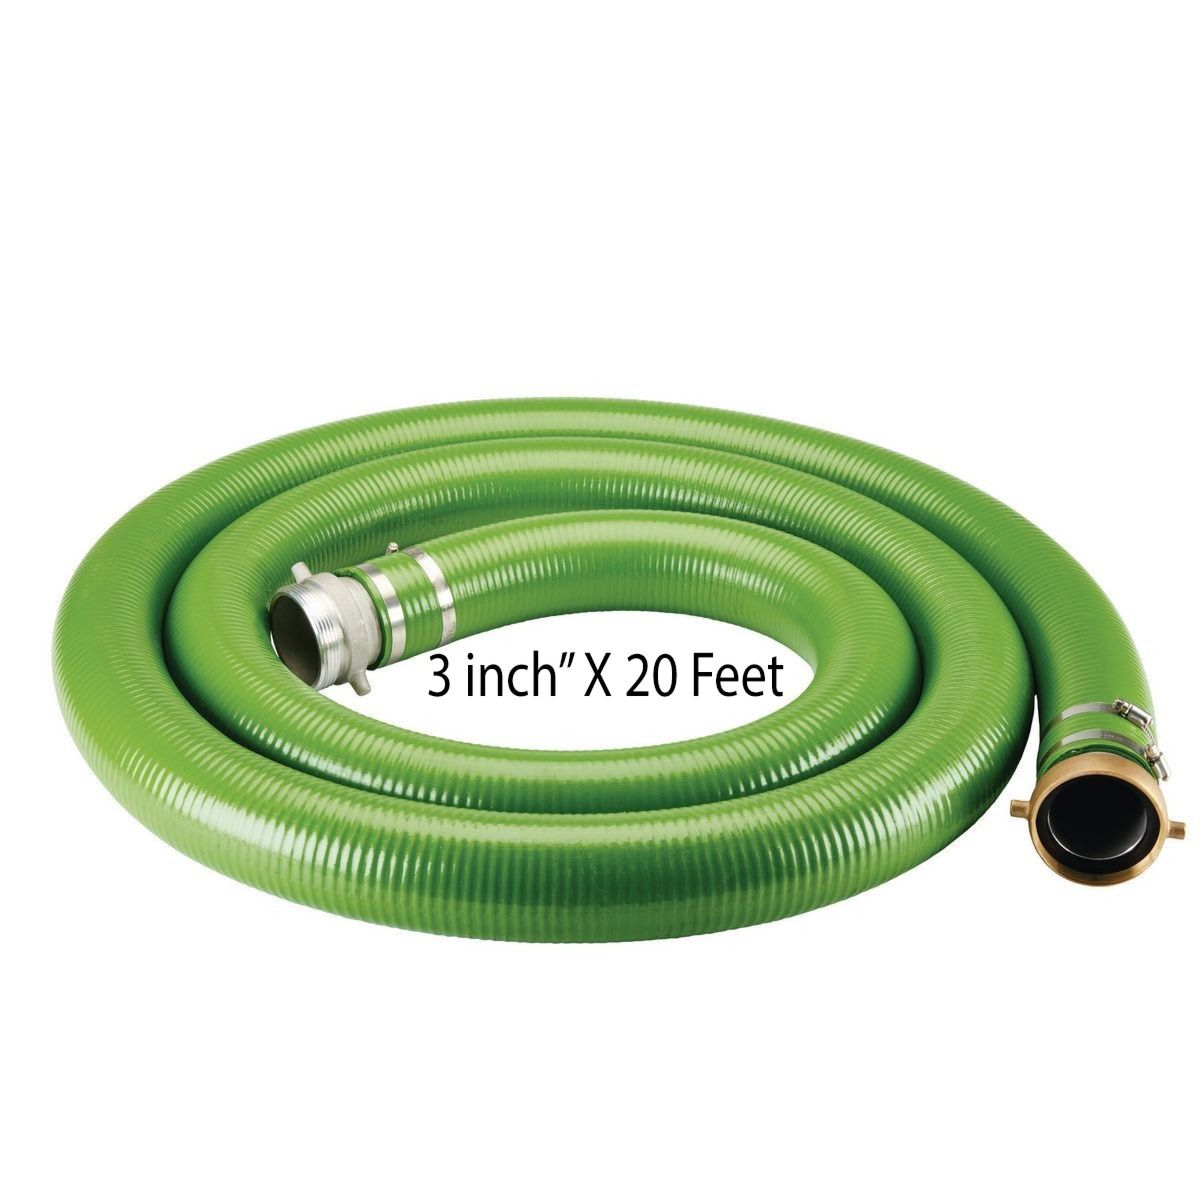 65 psi Green Water Suction Hose 3" Fitting Size Details about   20 ft 2P568, MG TJ 